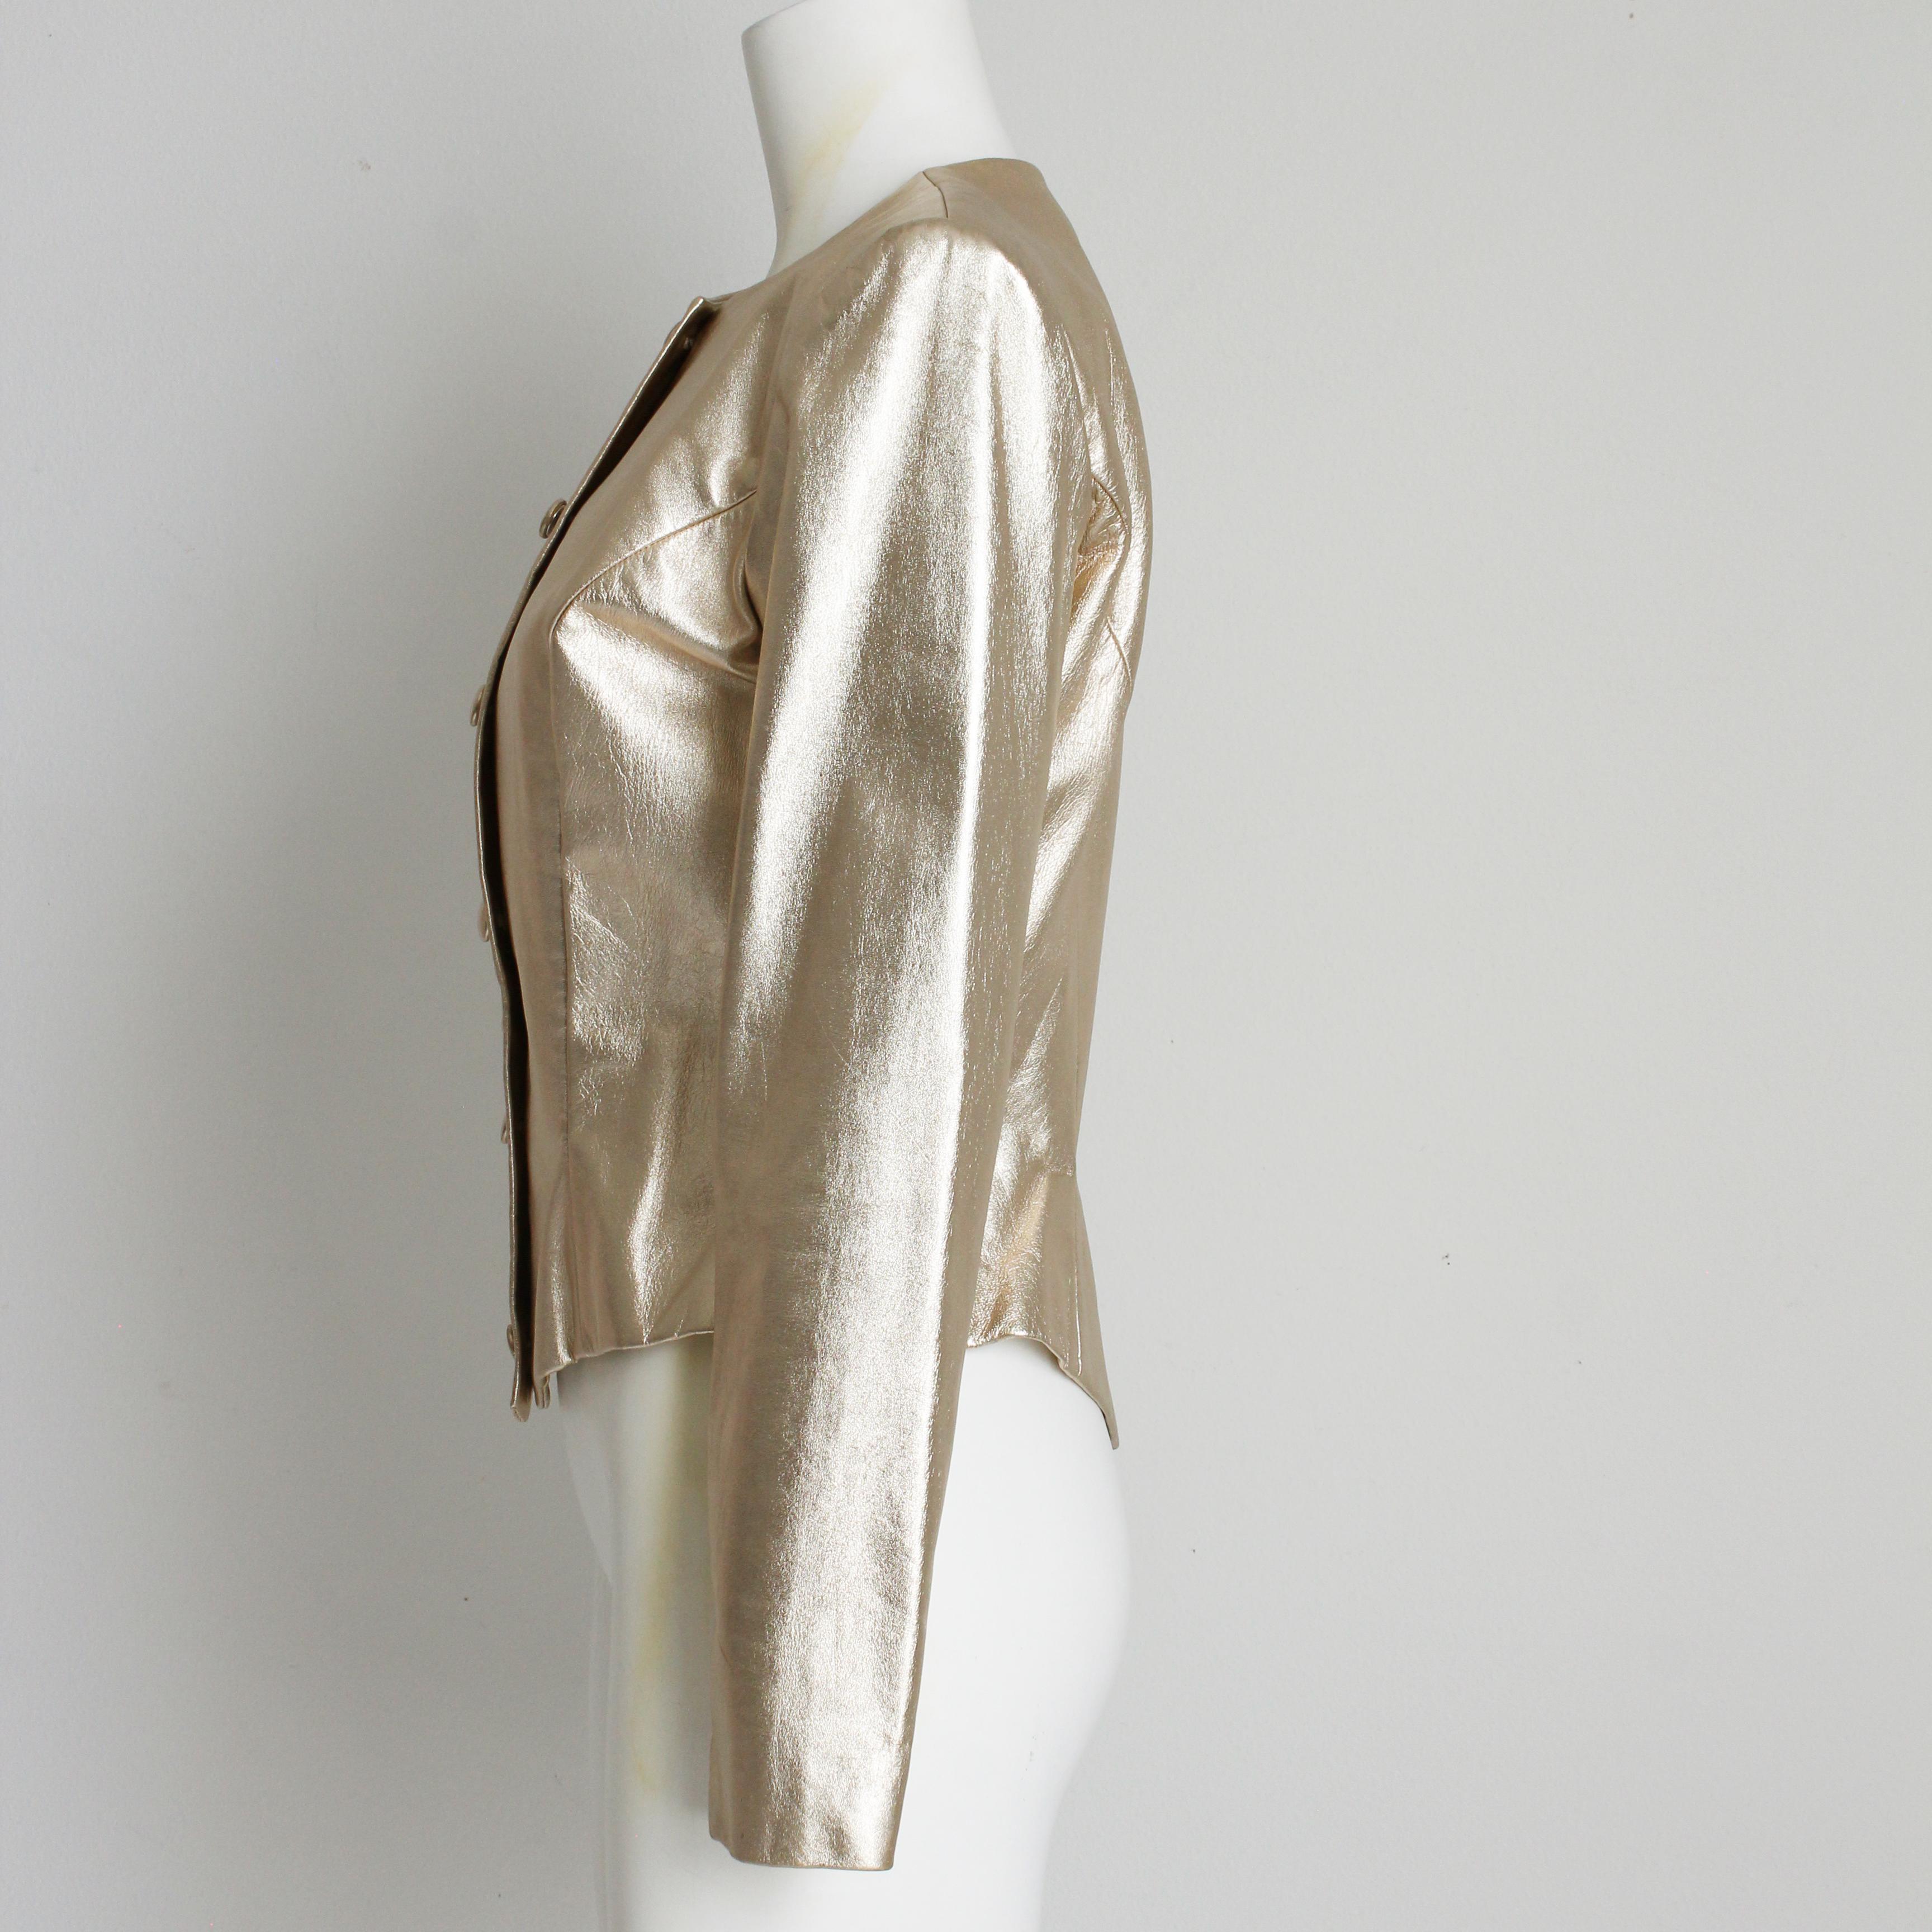 Vicky Tiel Couture Jacket Metallic Gold Leather Formal Evening Vintage Size 42 For Sale 3